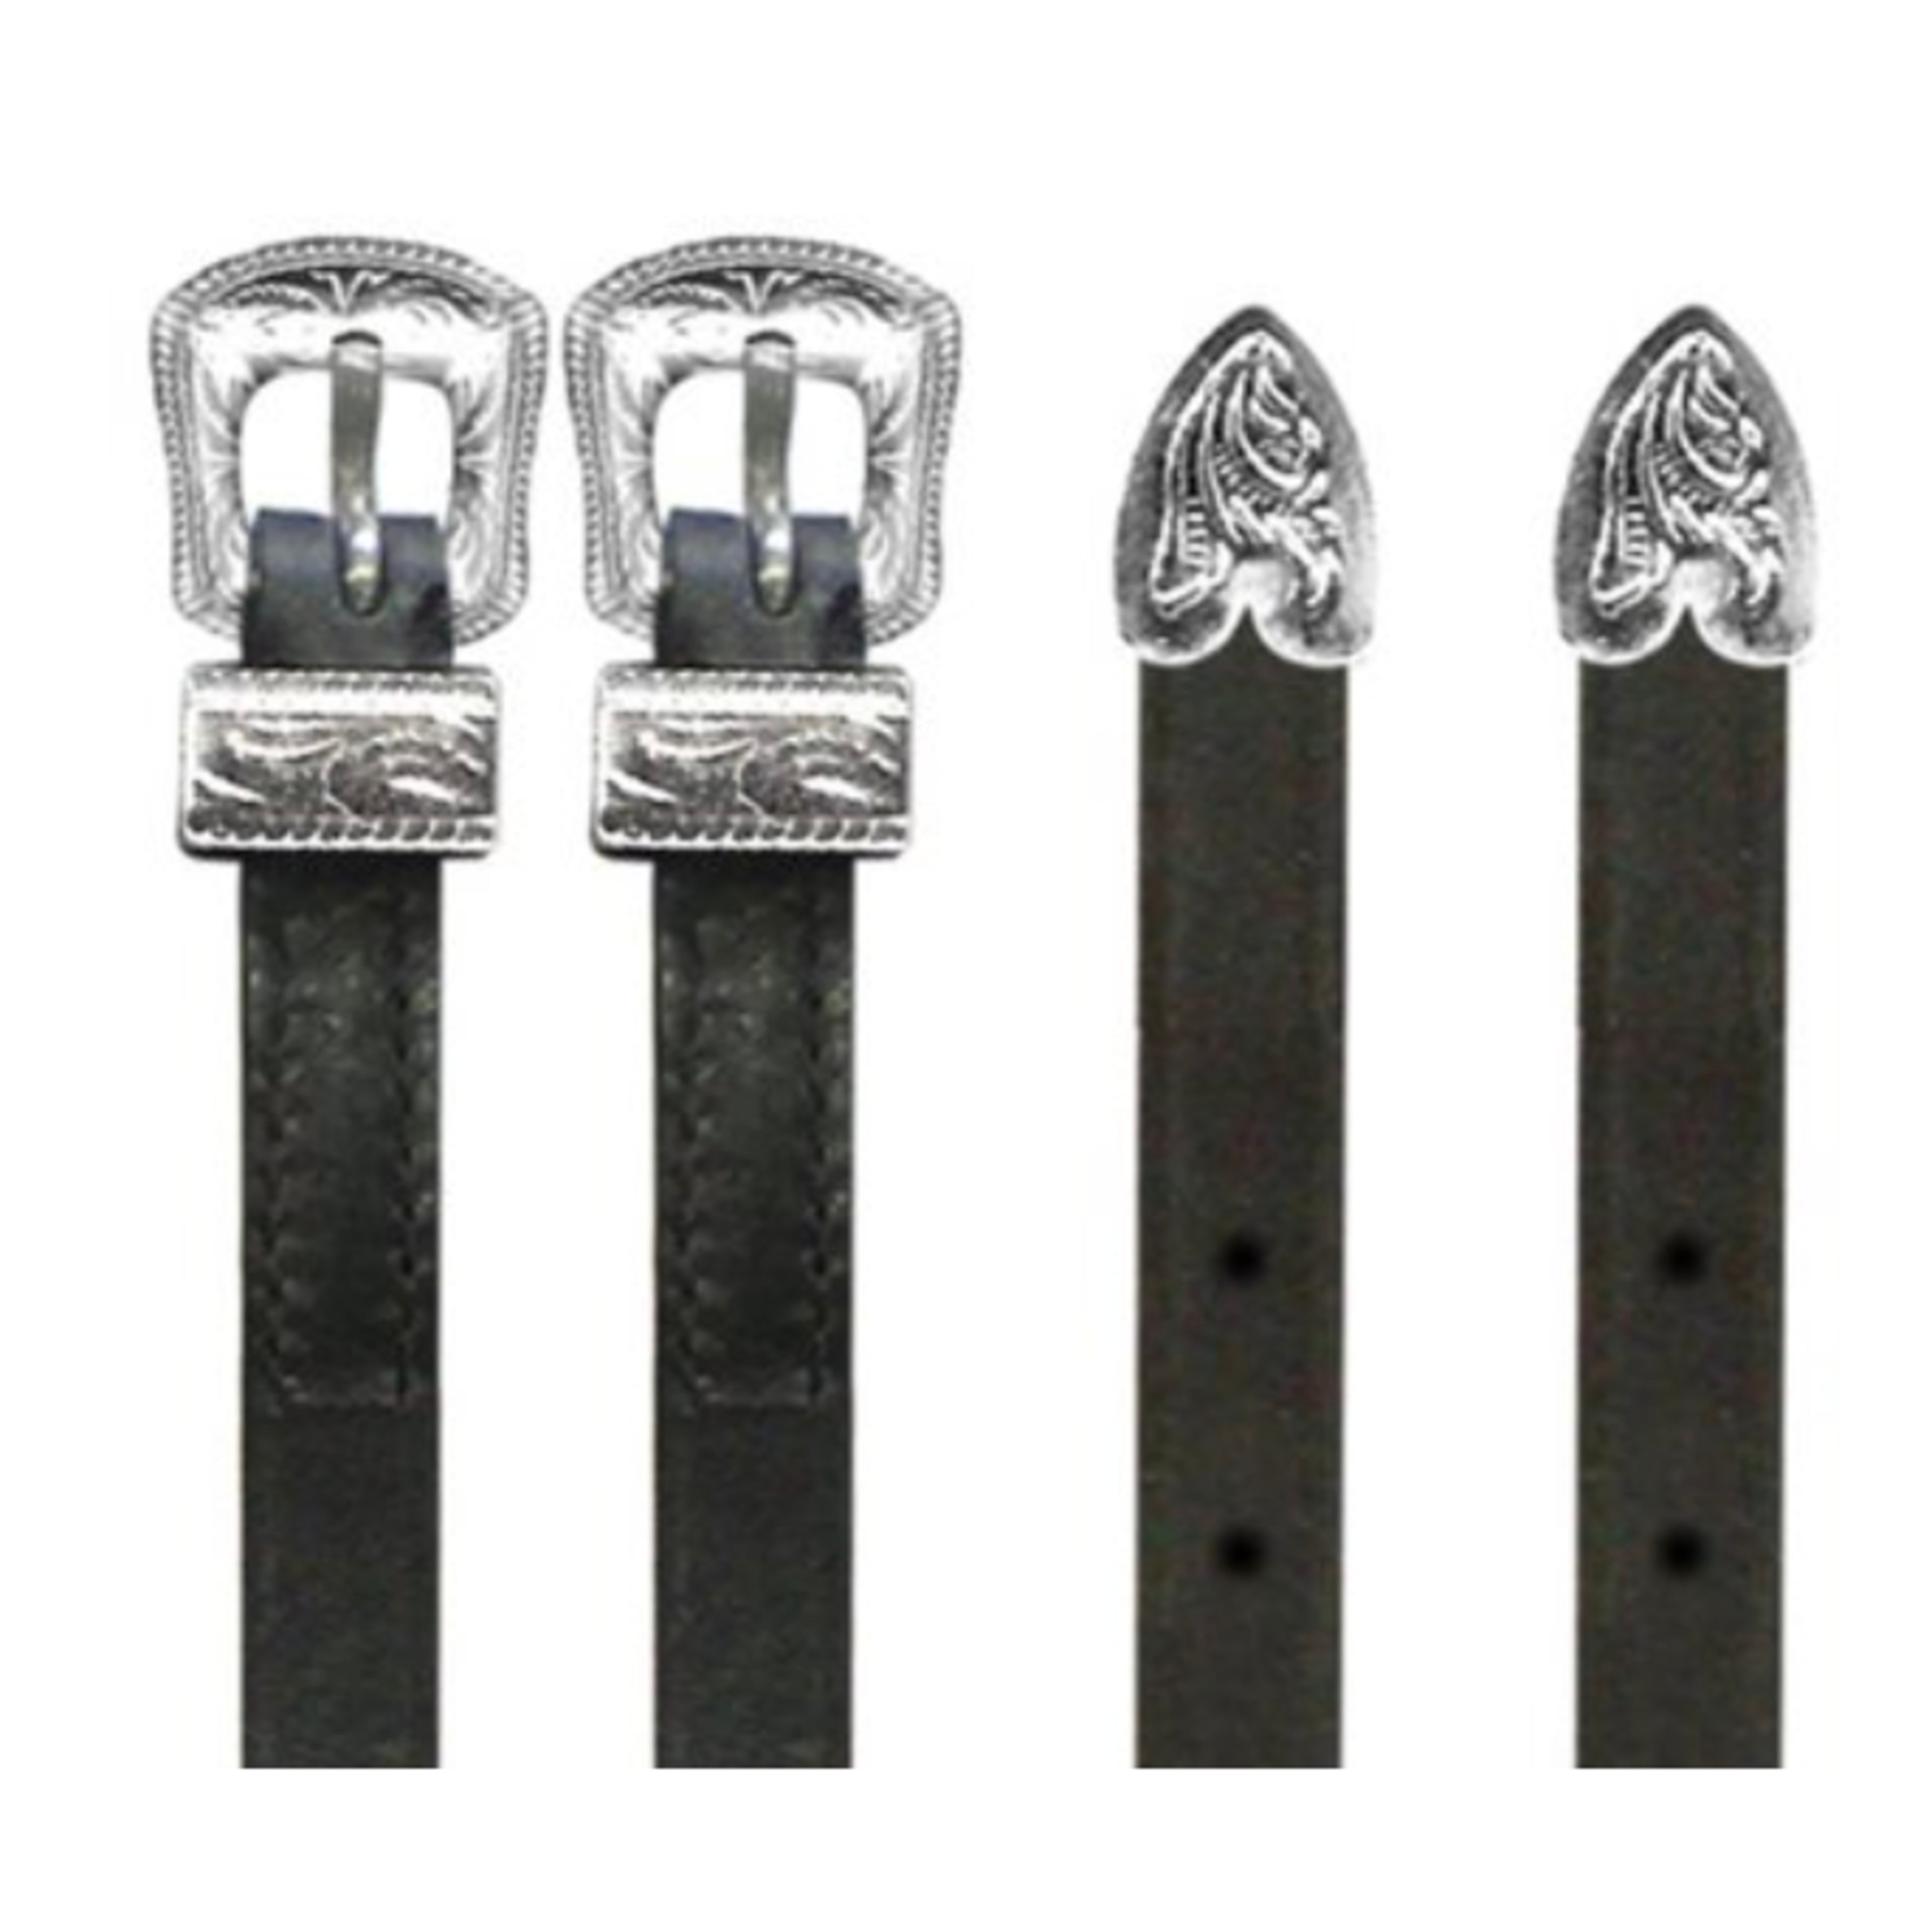 Perris Spur Straps w/ Silver Buckles